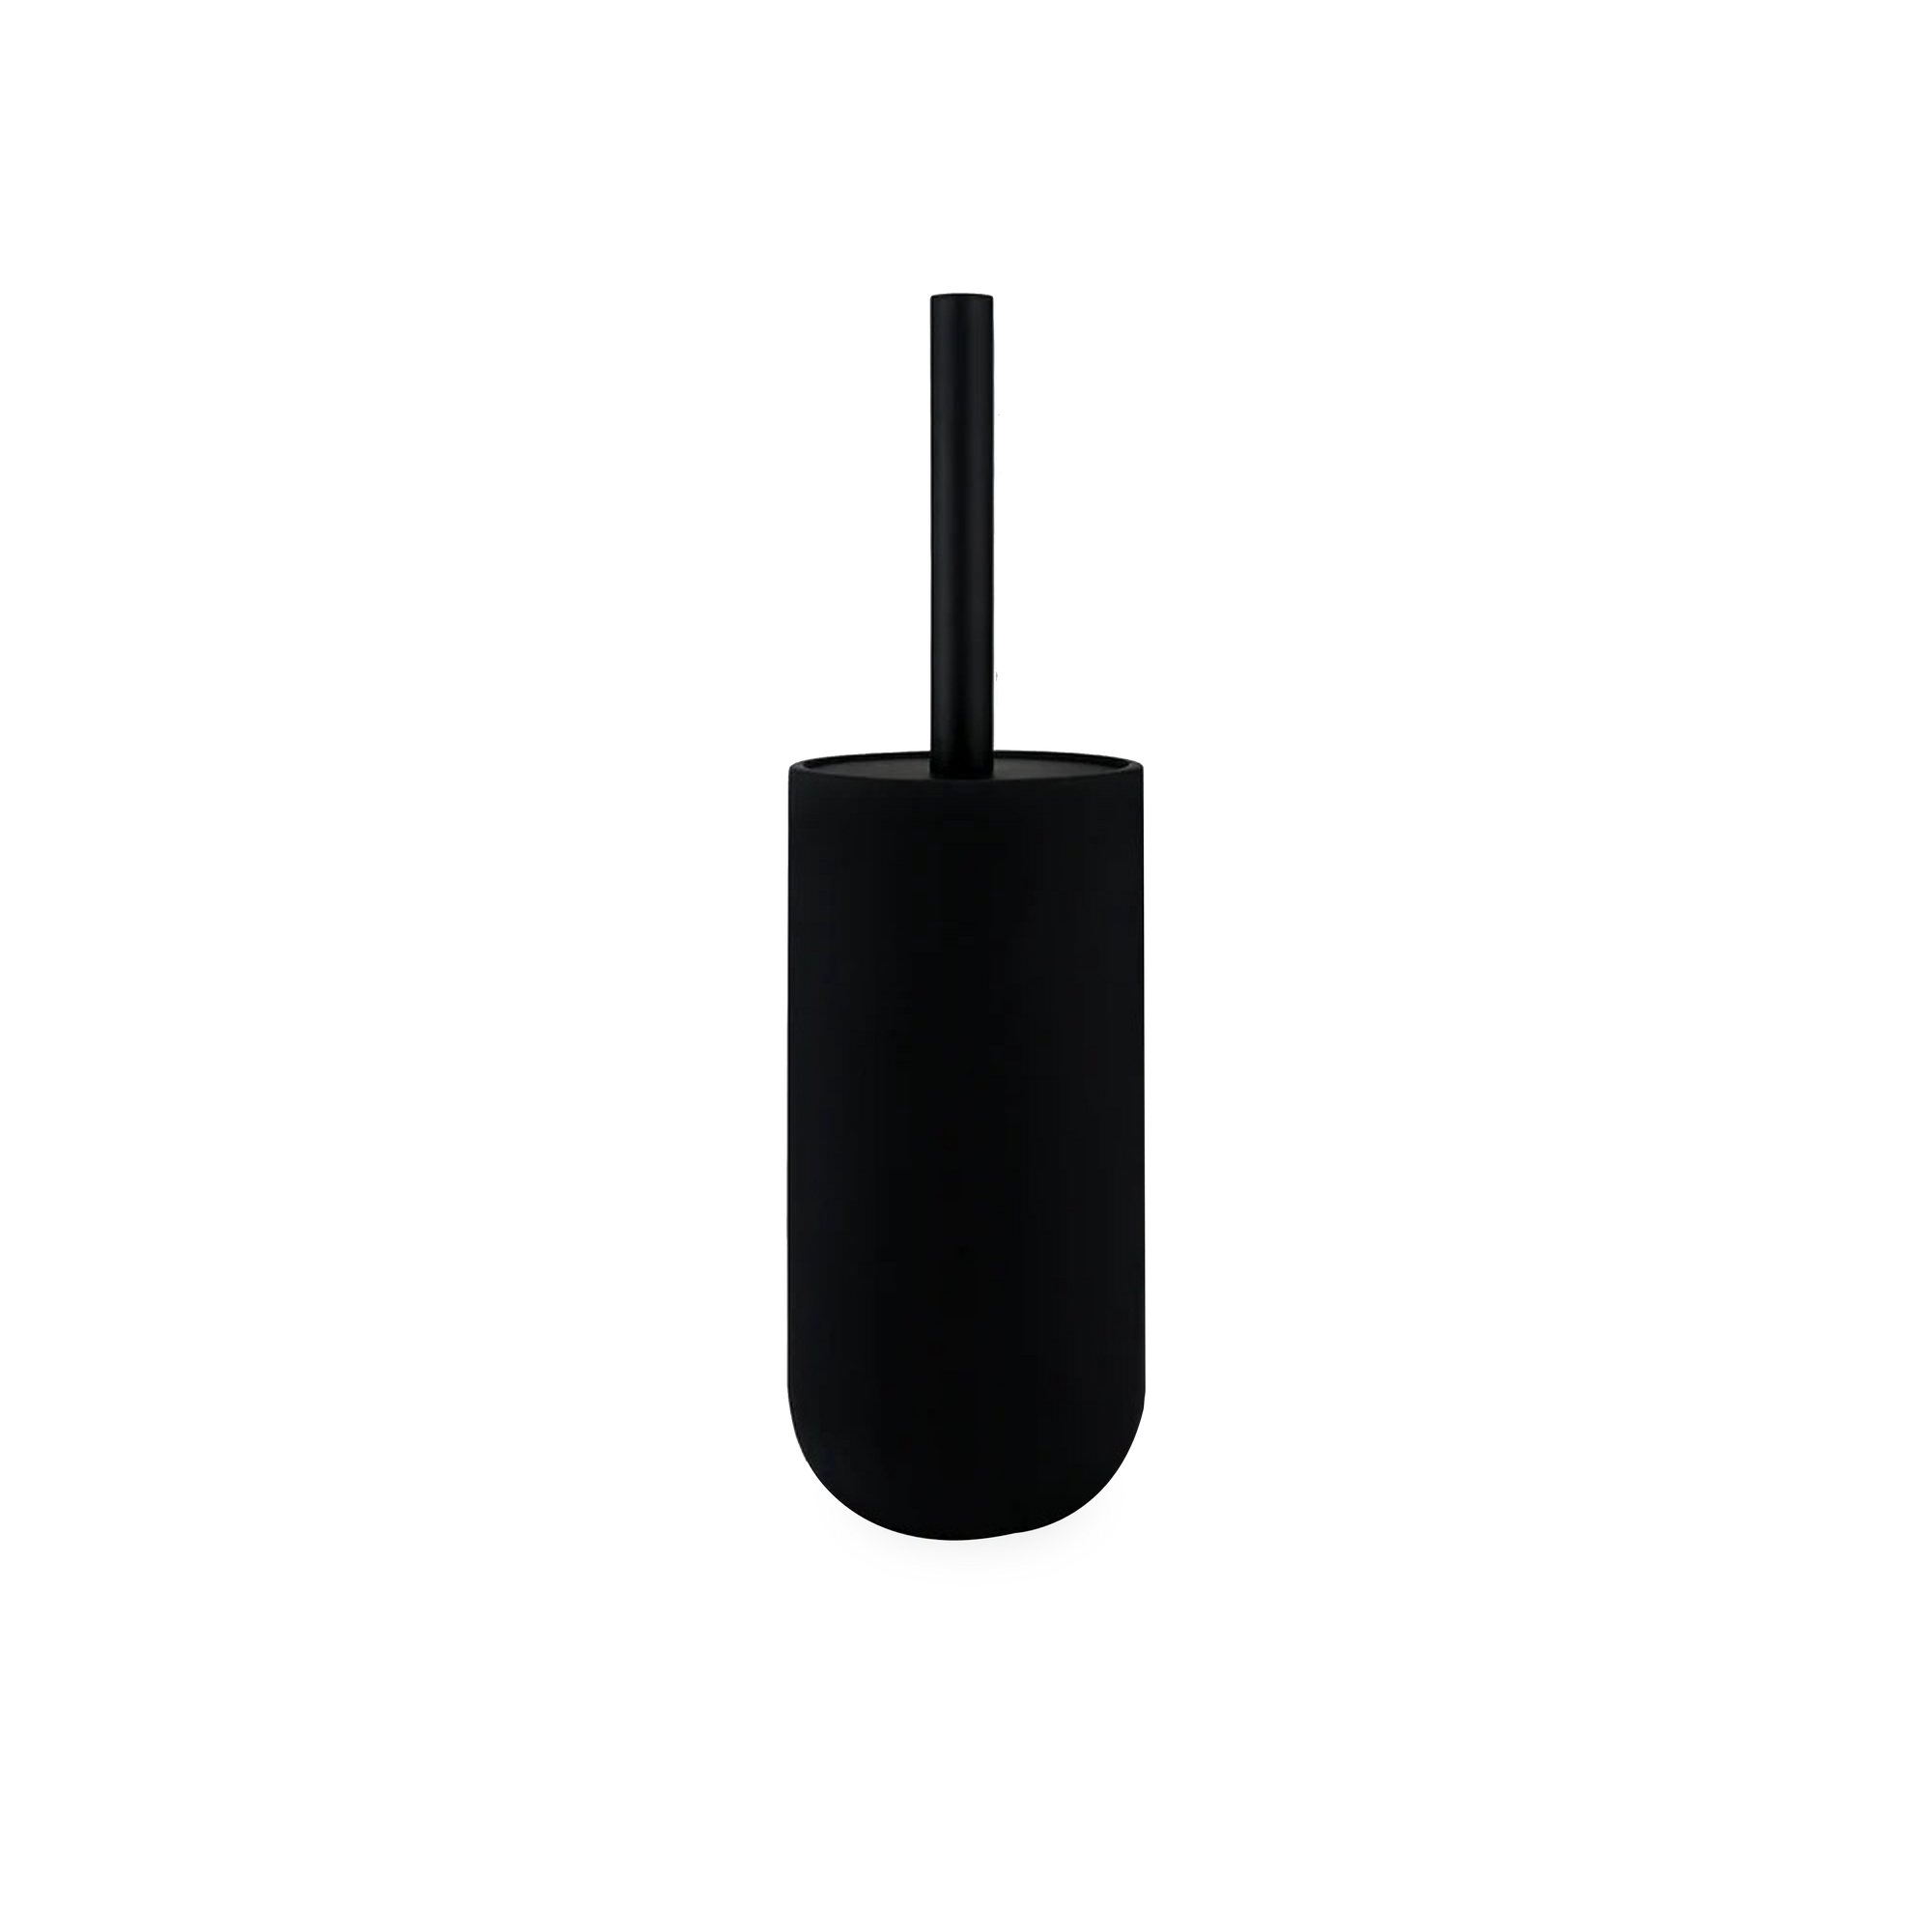 Using soft and organic forms, the Ceramic Rubber Toilet Brush is made of ceramics coated with a matte black rubber finish along with a black handle.